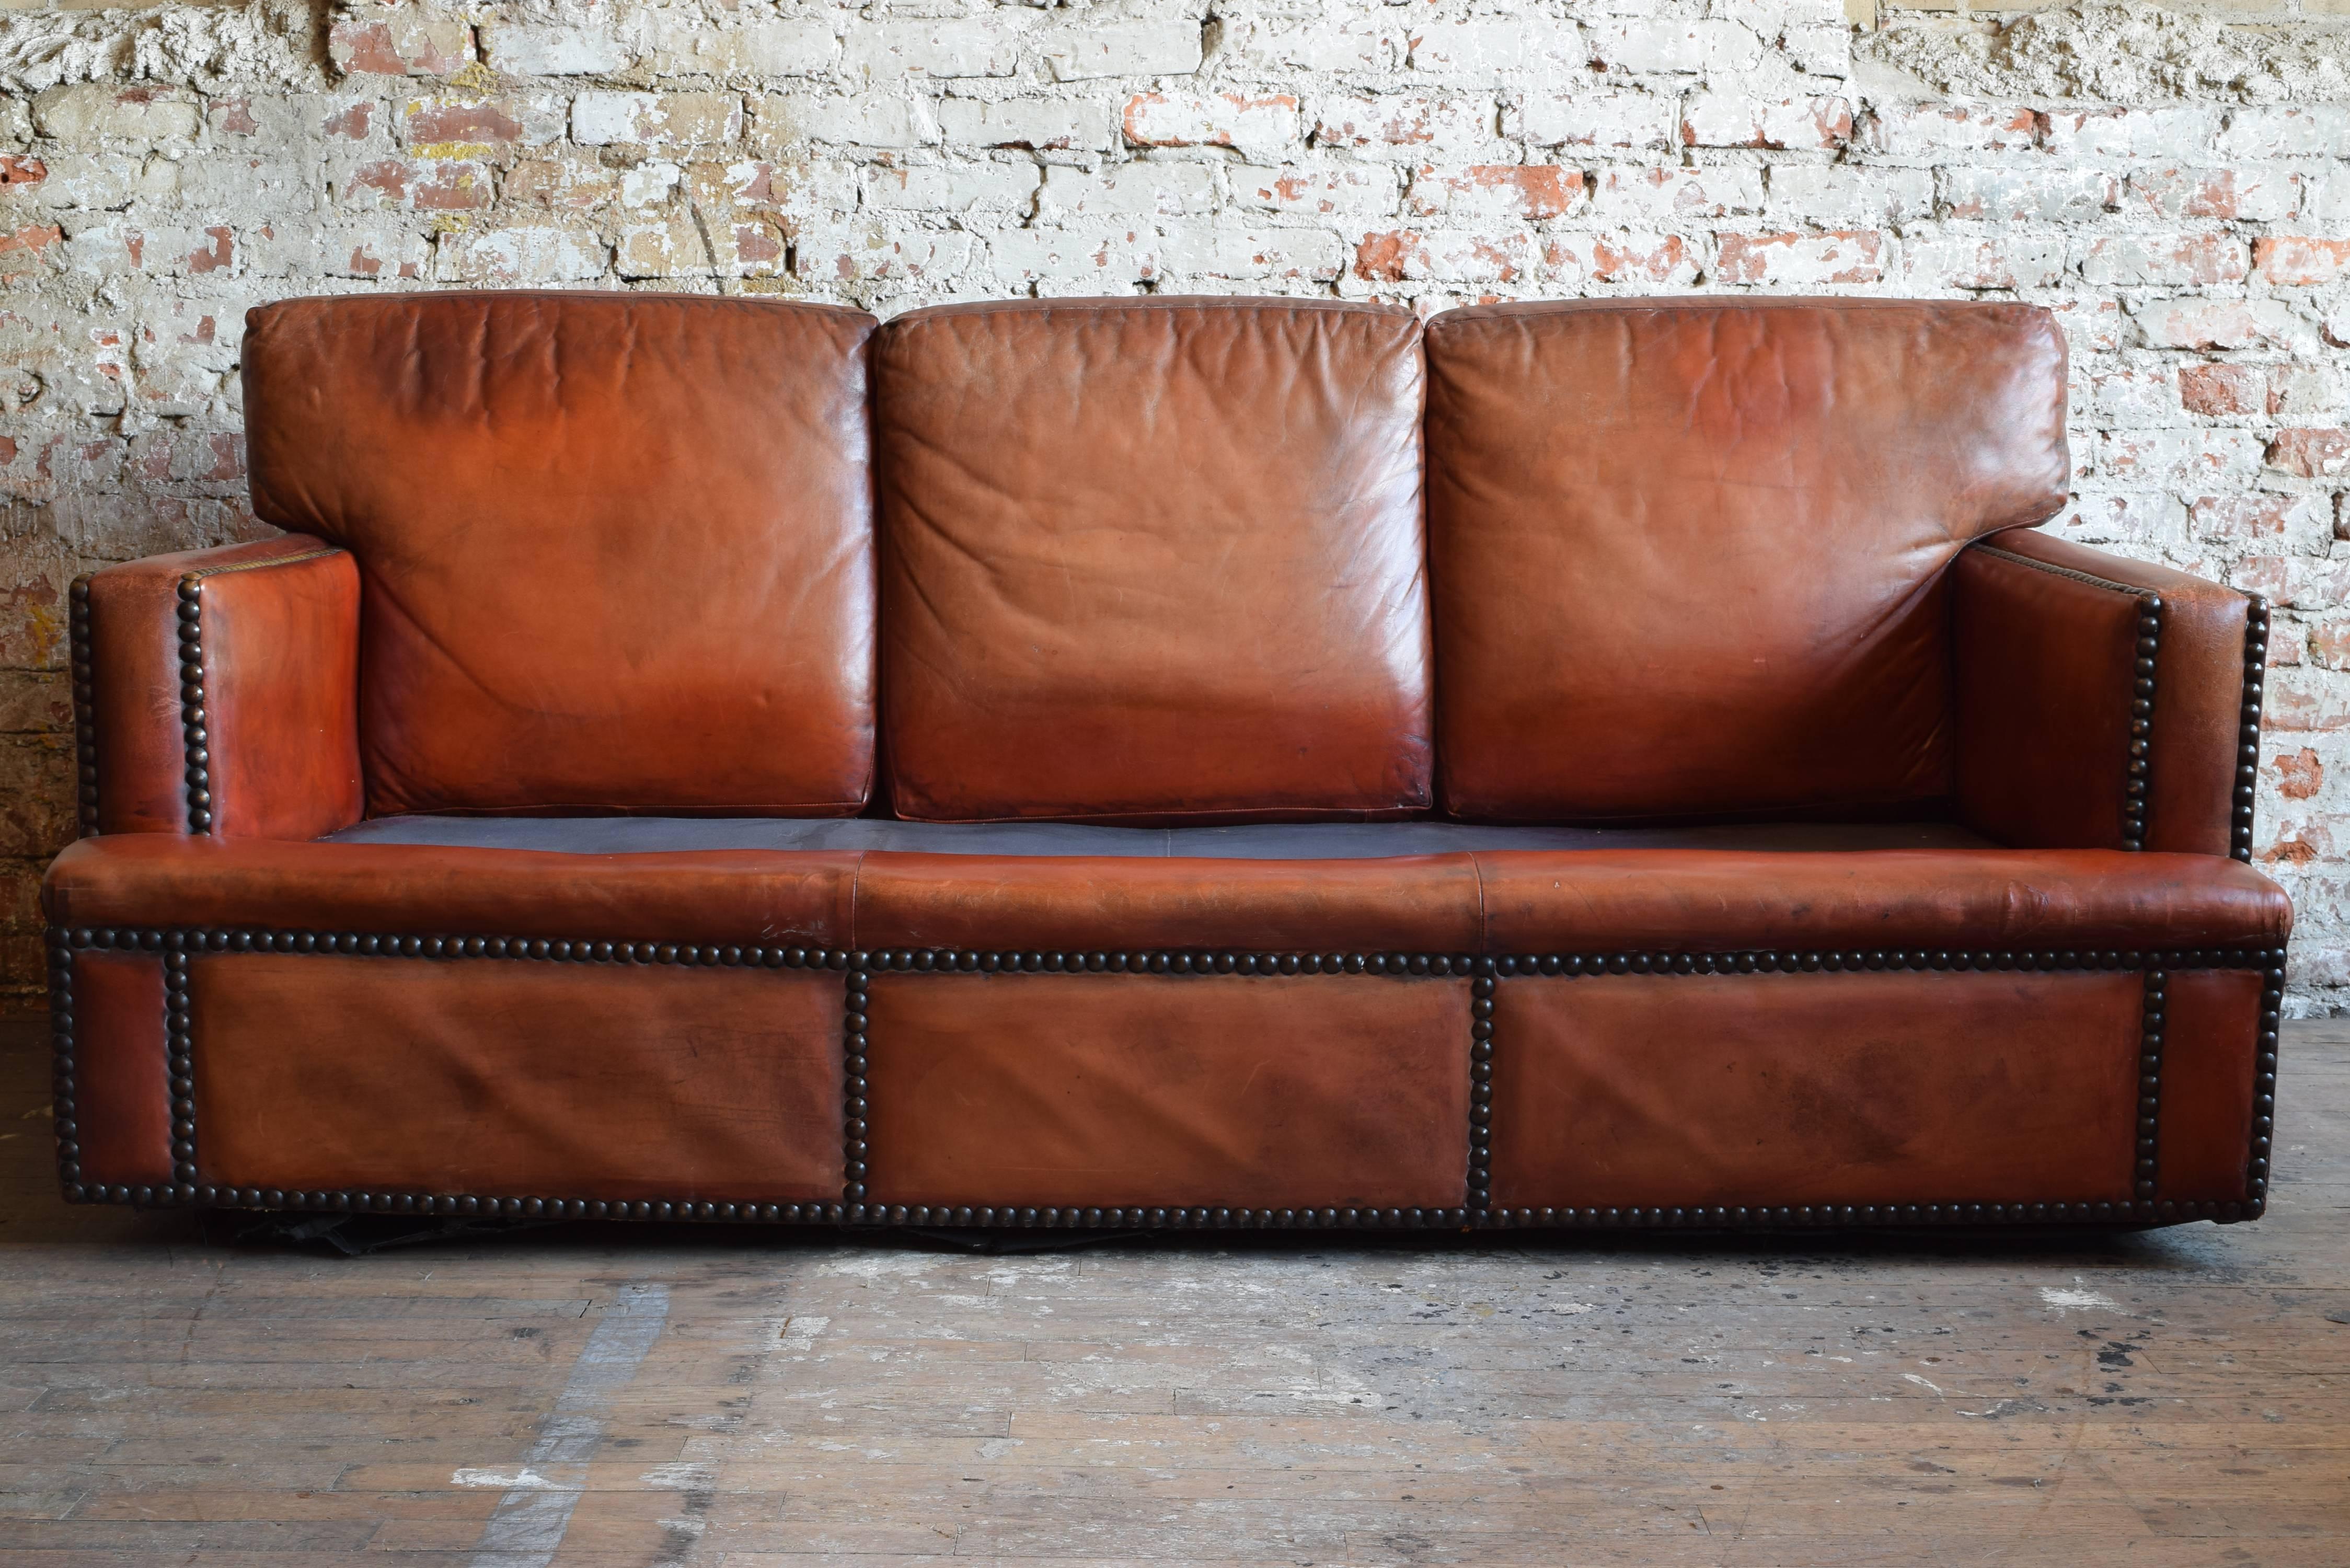 English Leather Upholstered and Nailhead Decorated Sofa, Mid-20th Century 2